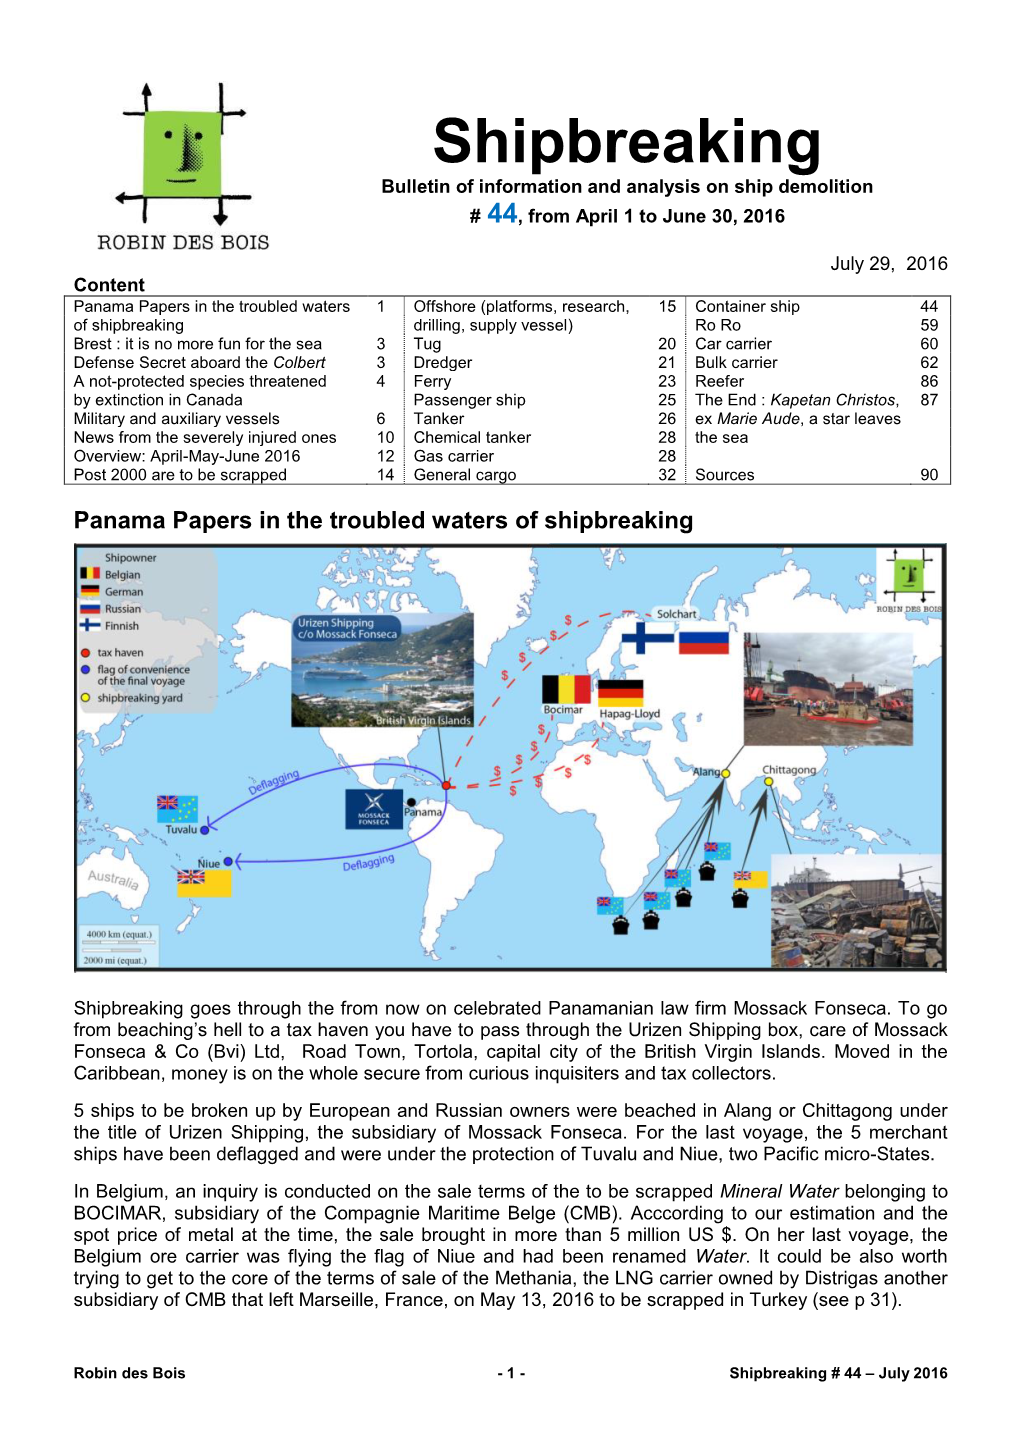 Shipbreaking Bulletin of Information and Analysis on Ship Demolition # 44, from April 1 to June 30, 2016